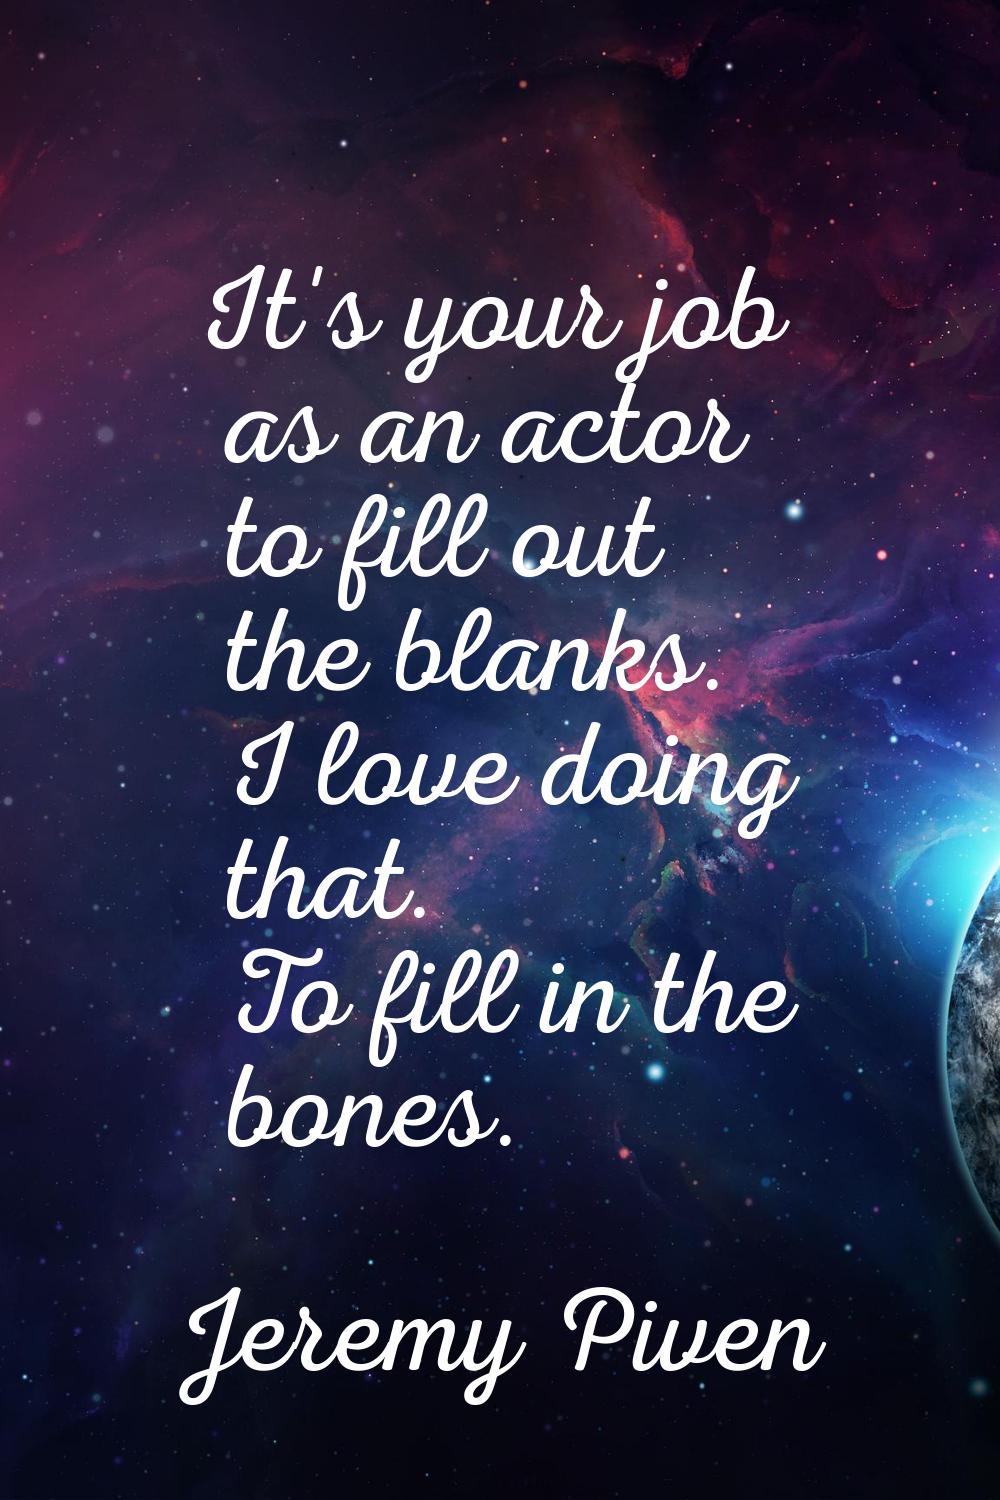 It's your job as an actor to fill out the blanks. I love doing that. To fill in the bones.